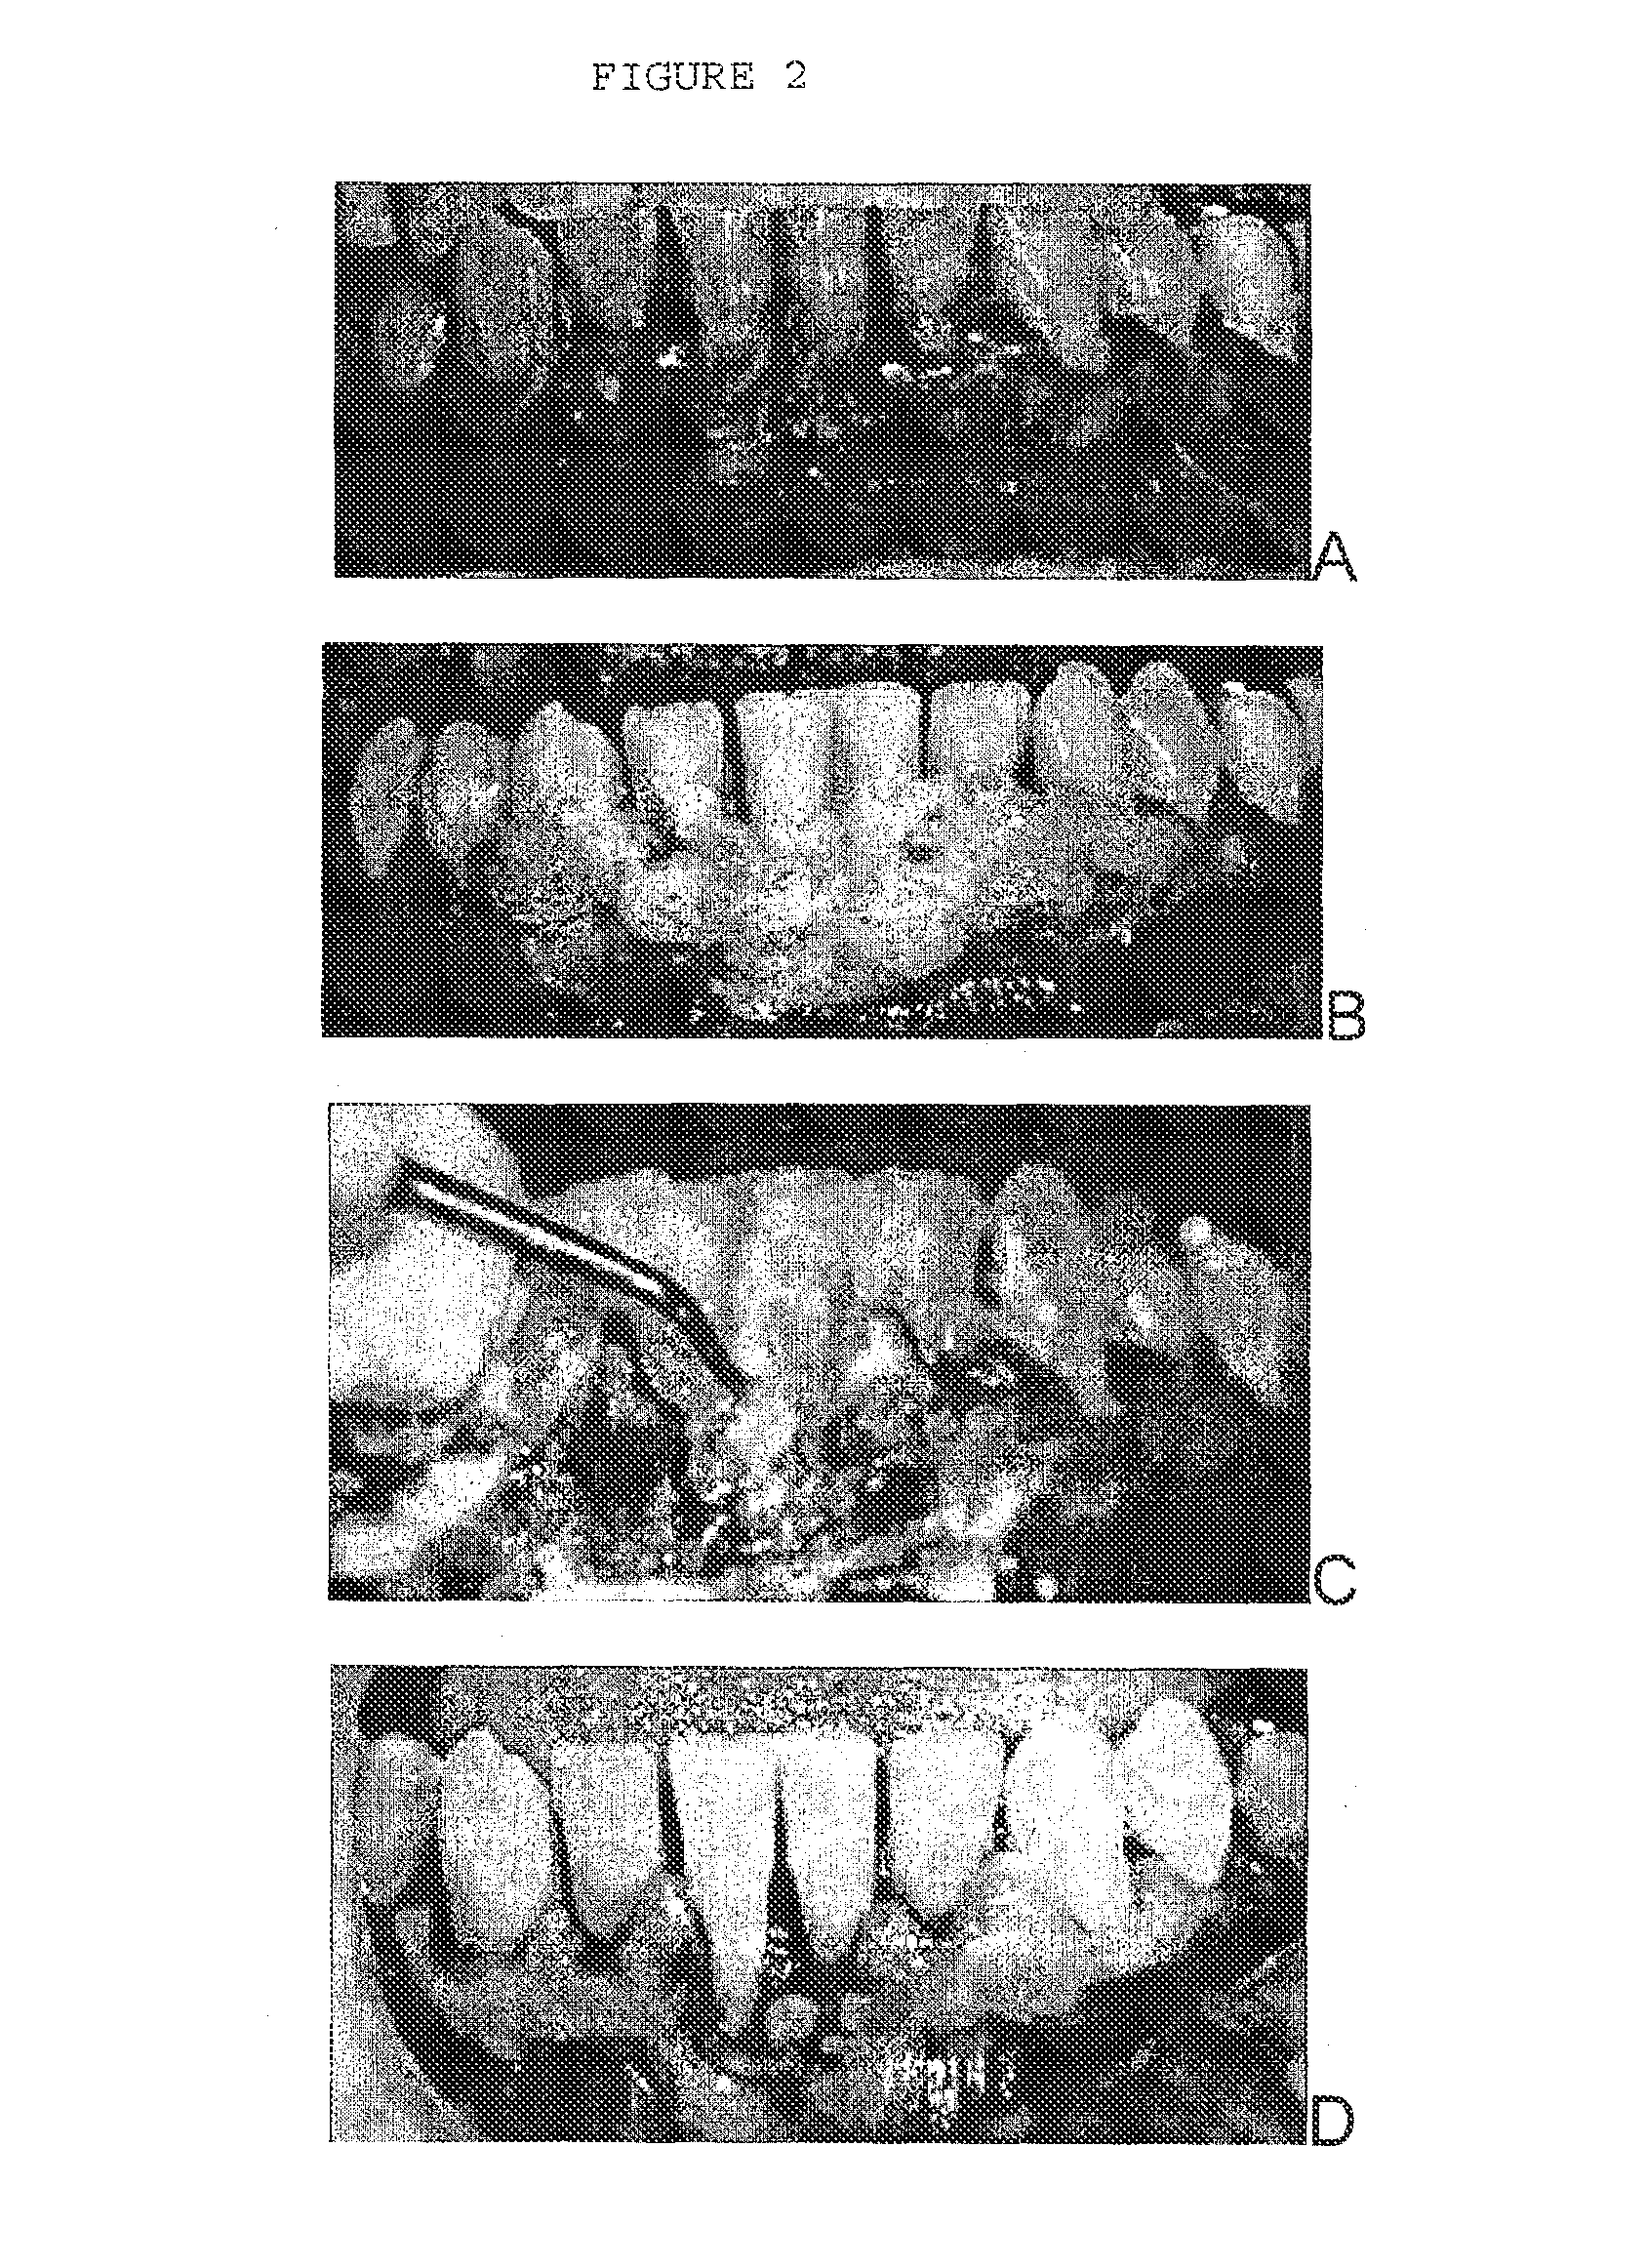 Combination of an oxidant, a photosensitizer and a wound healing agent for oral disinfection and treatment of oral disease